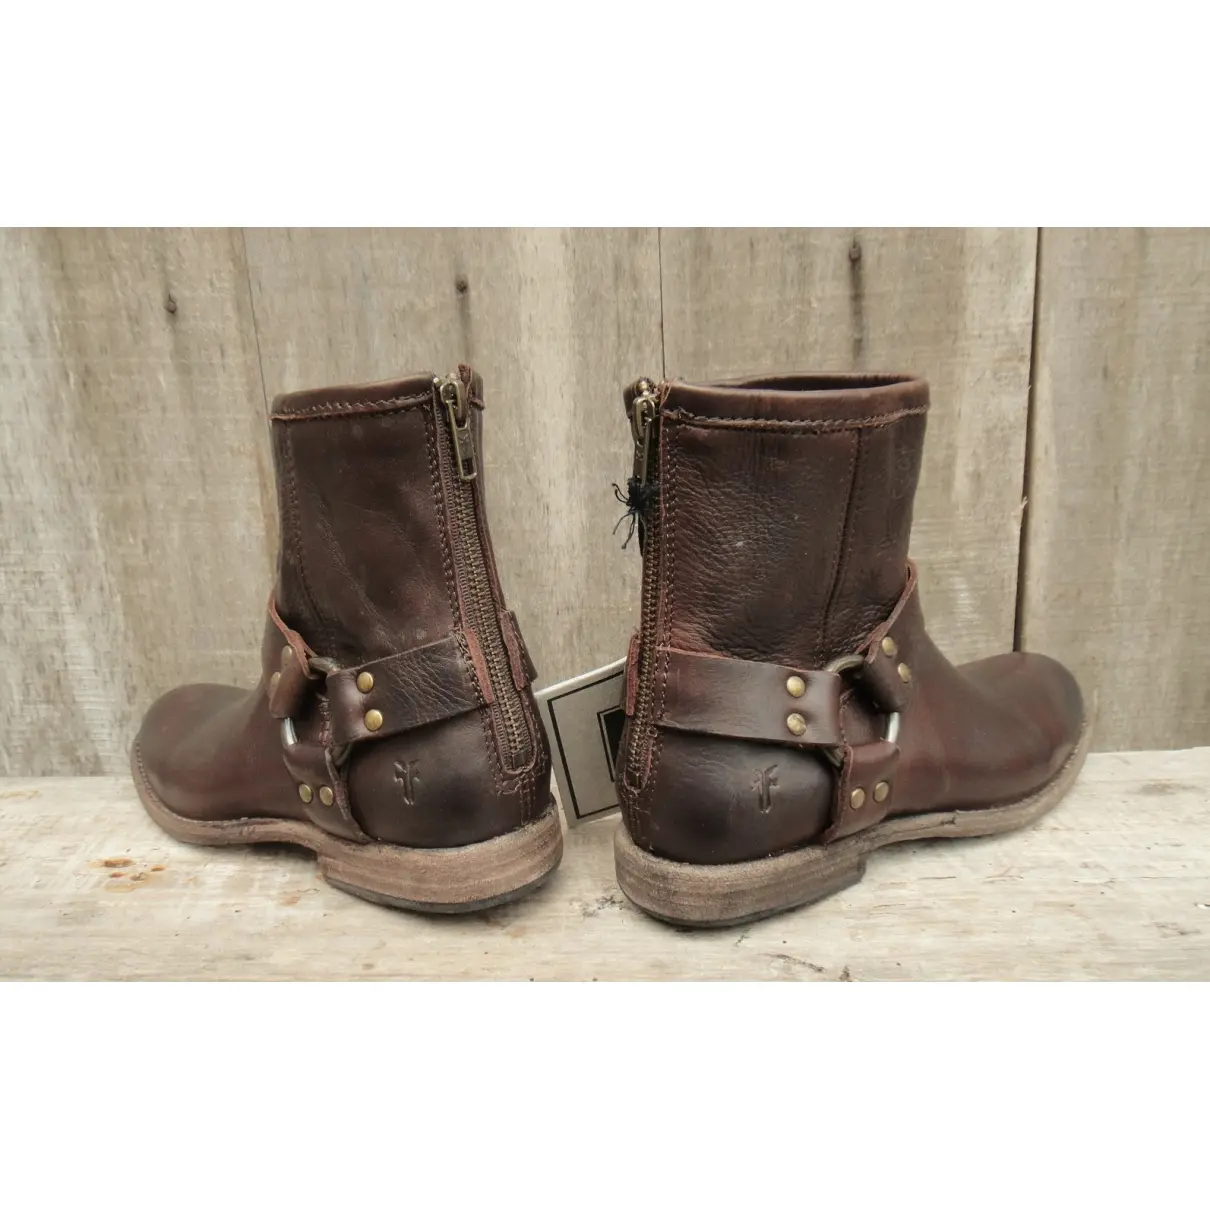 Buy Frye Leather buckled boots online